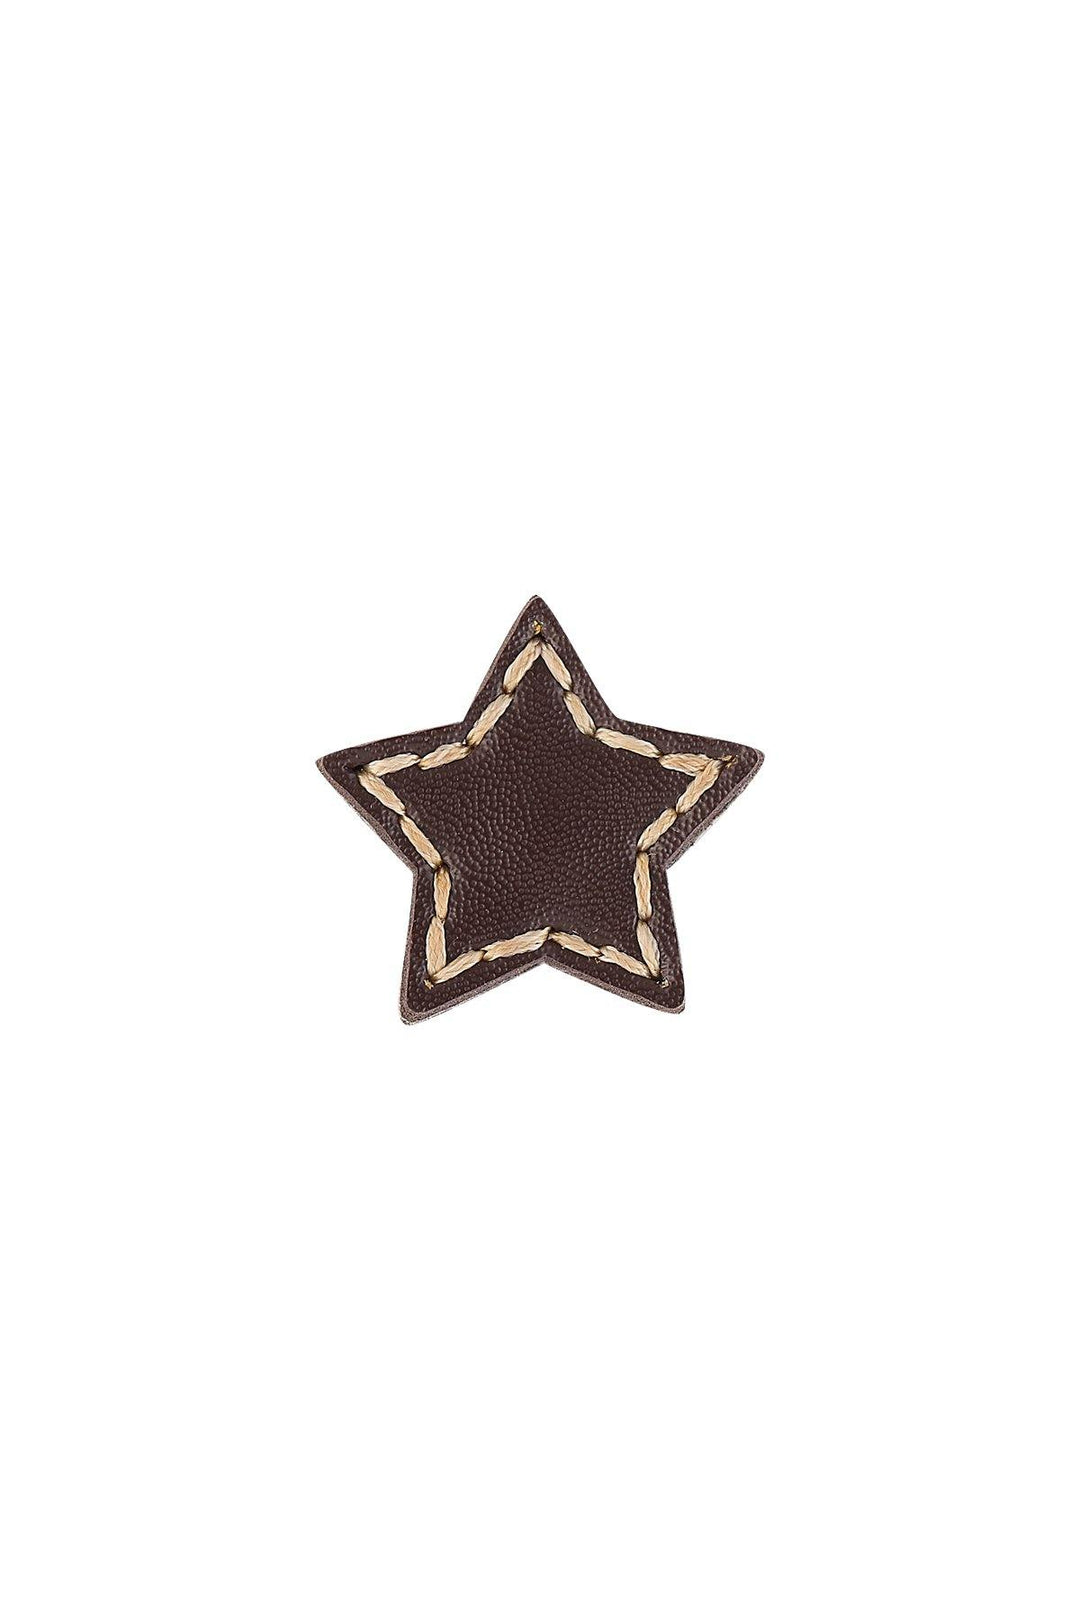 Star Shape Black & Brown Stitched Leather Button with Downhole Loop